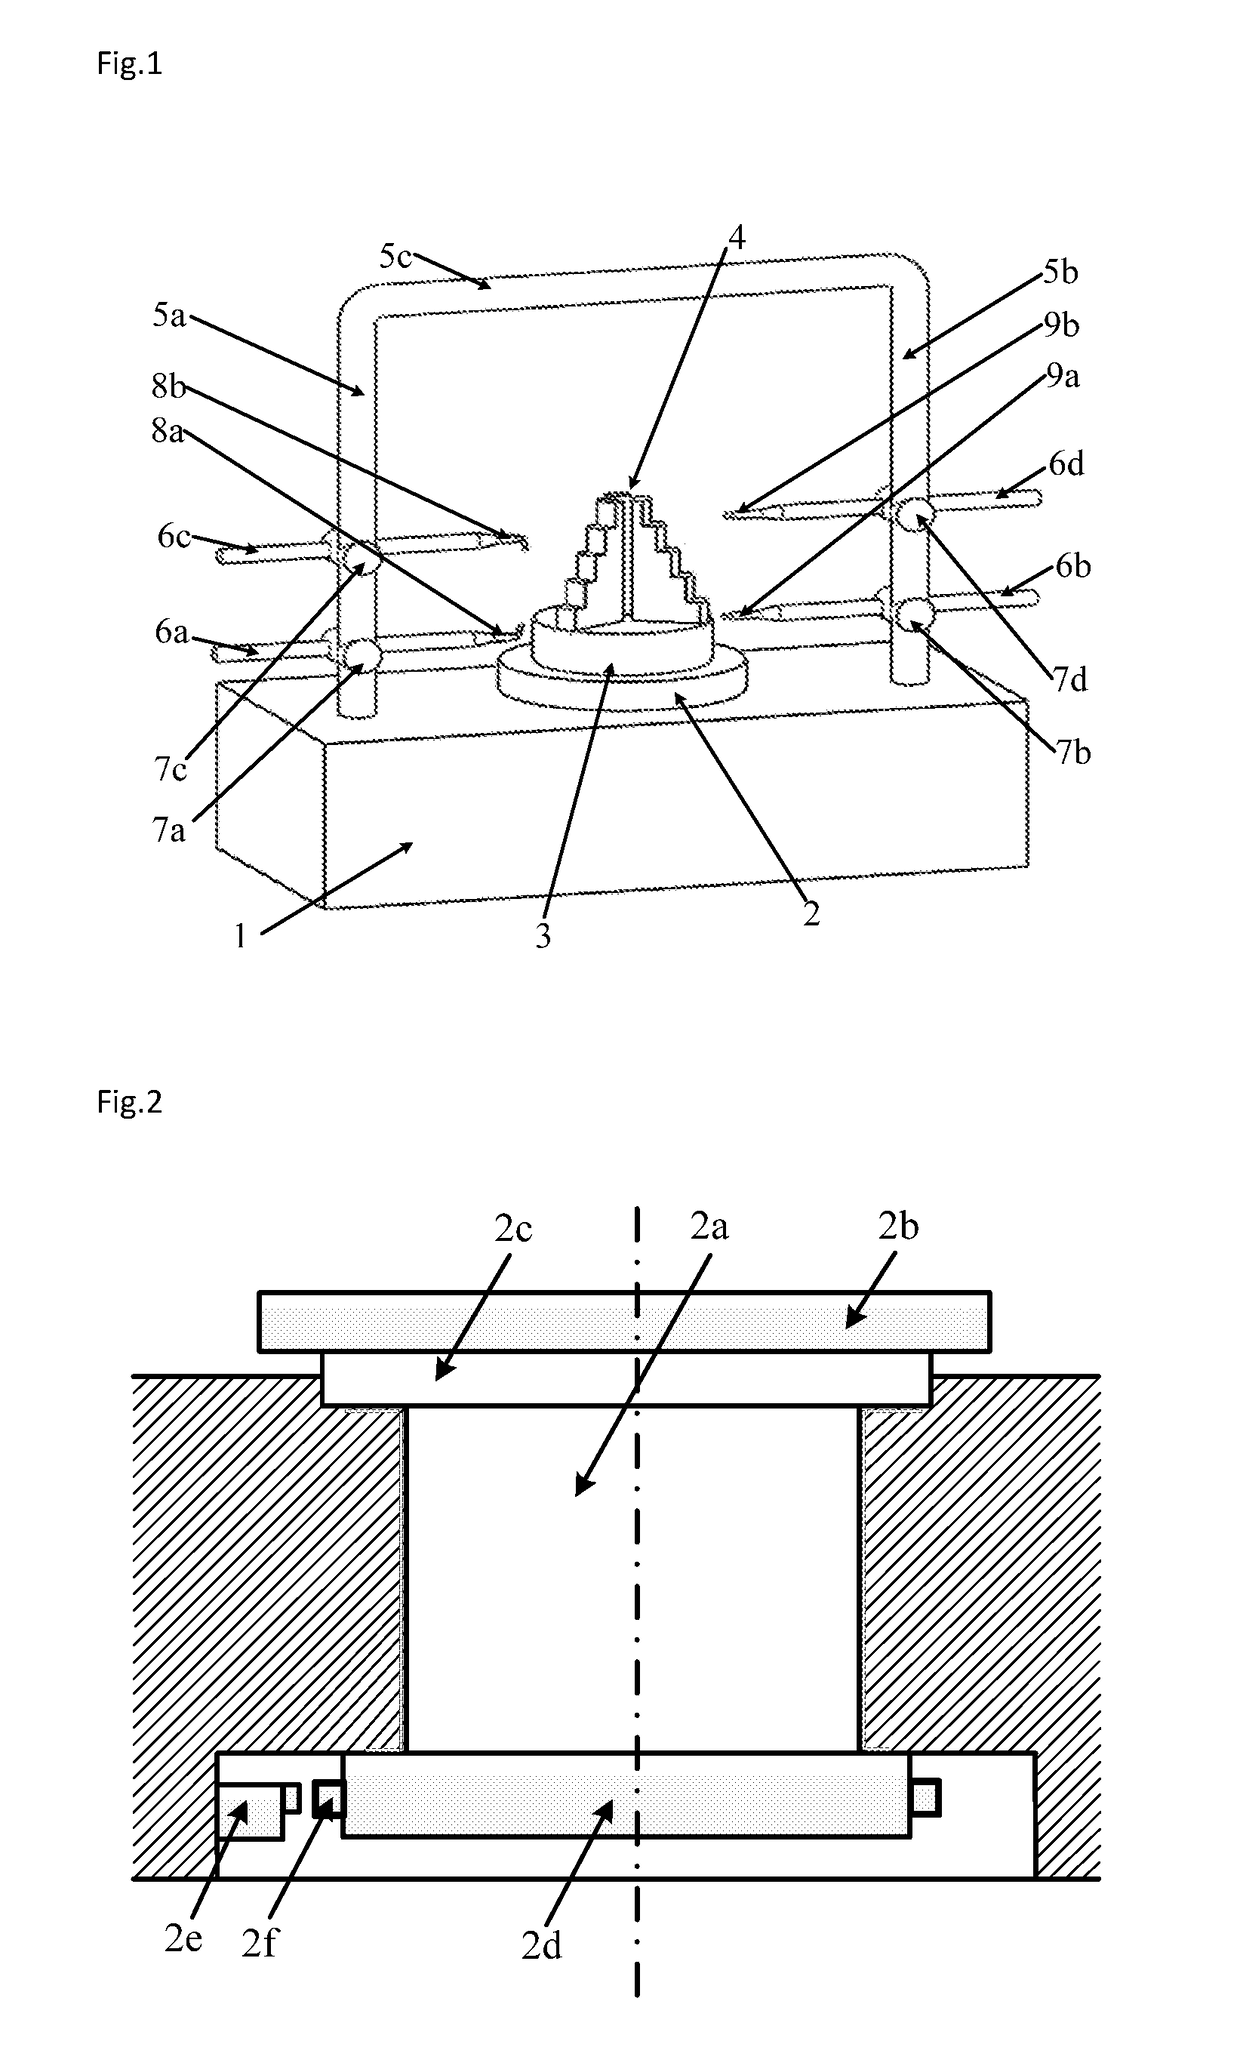 Aero engine rotor assembling method and device based on concentricity and verticality measurement